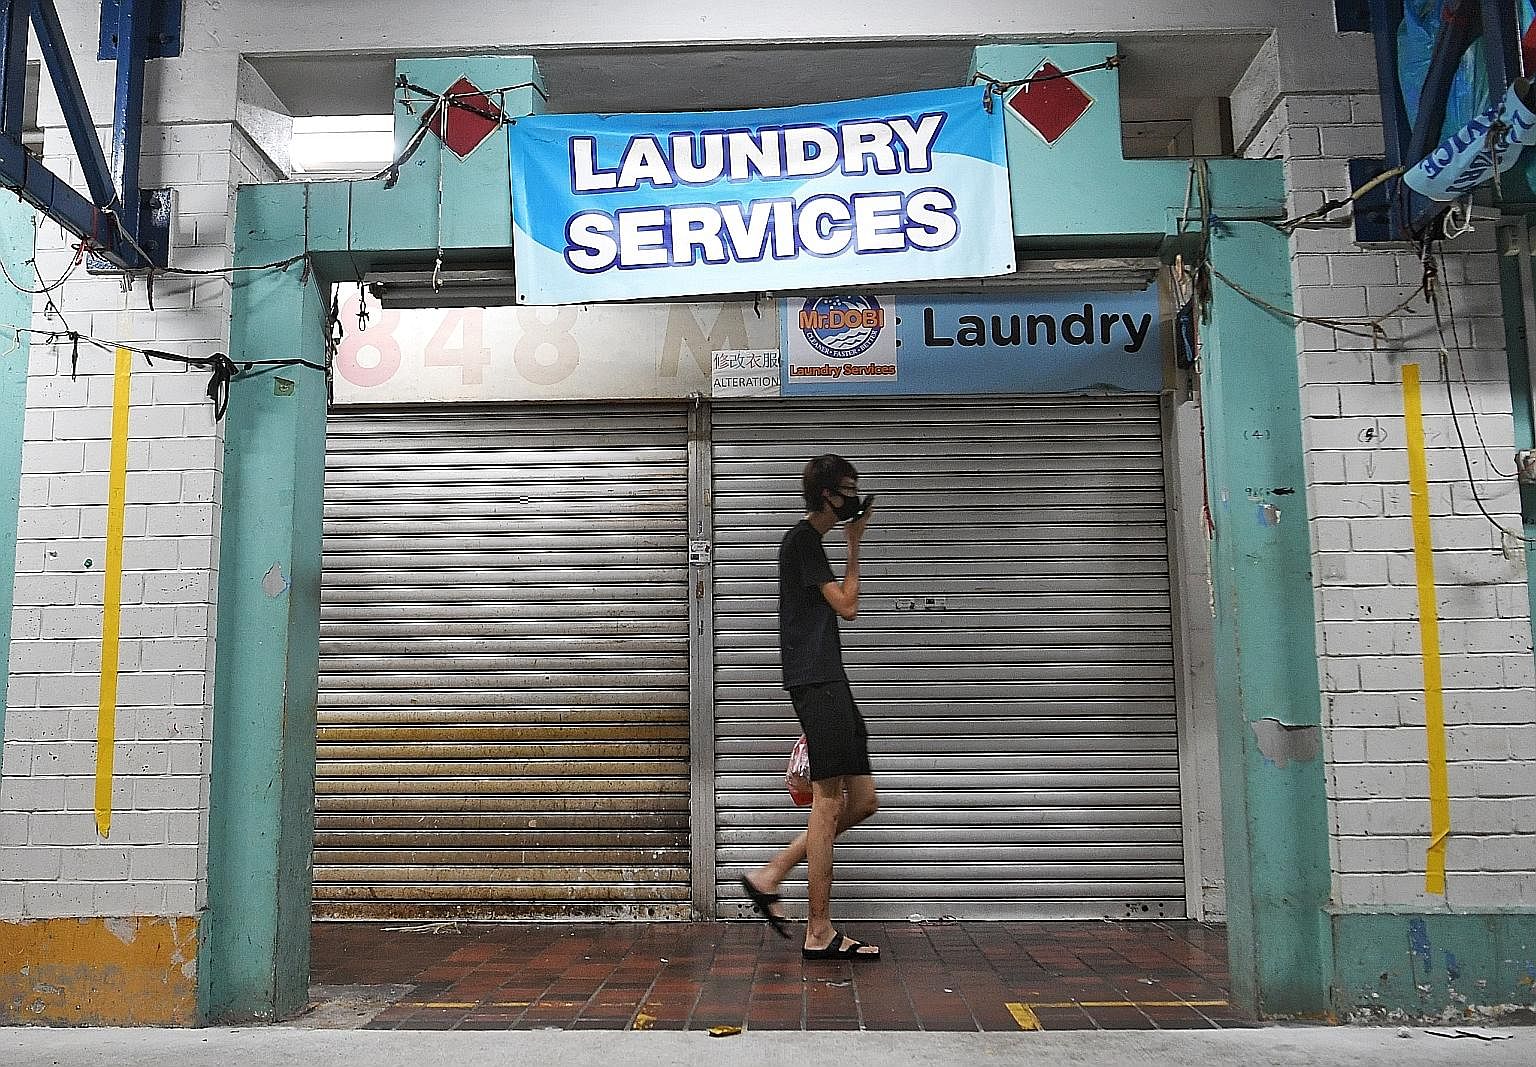 Mr Dobi Laundry Services in Yishun is one of the laundry shops that may not reopen yet, while some shops are planning to resume business with shorter opening hours and others are saying they will not allow walk-in customers. ST PHOTO: KHALID BABA